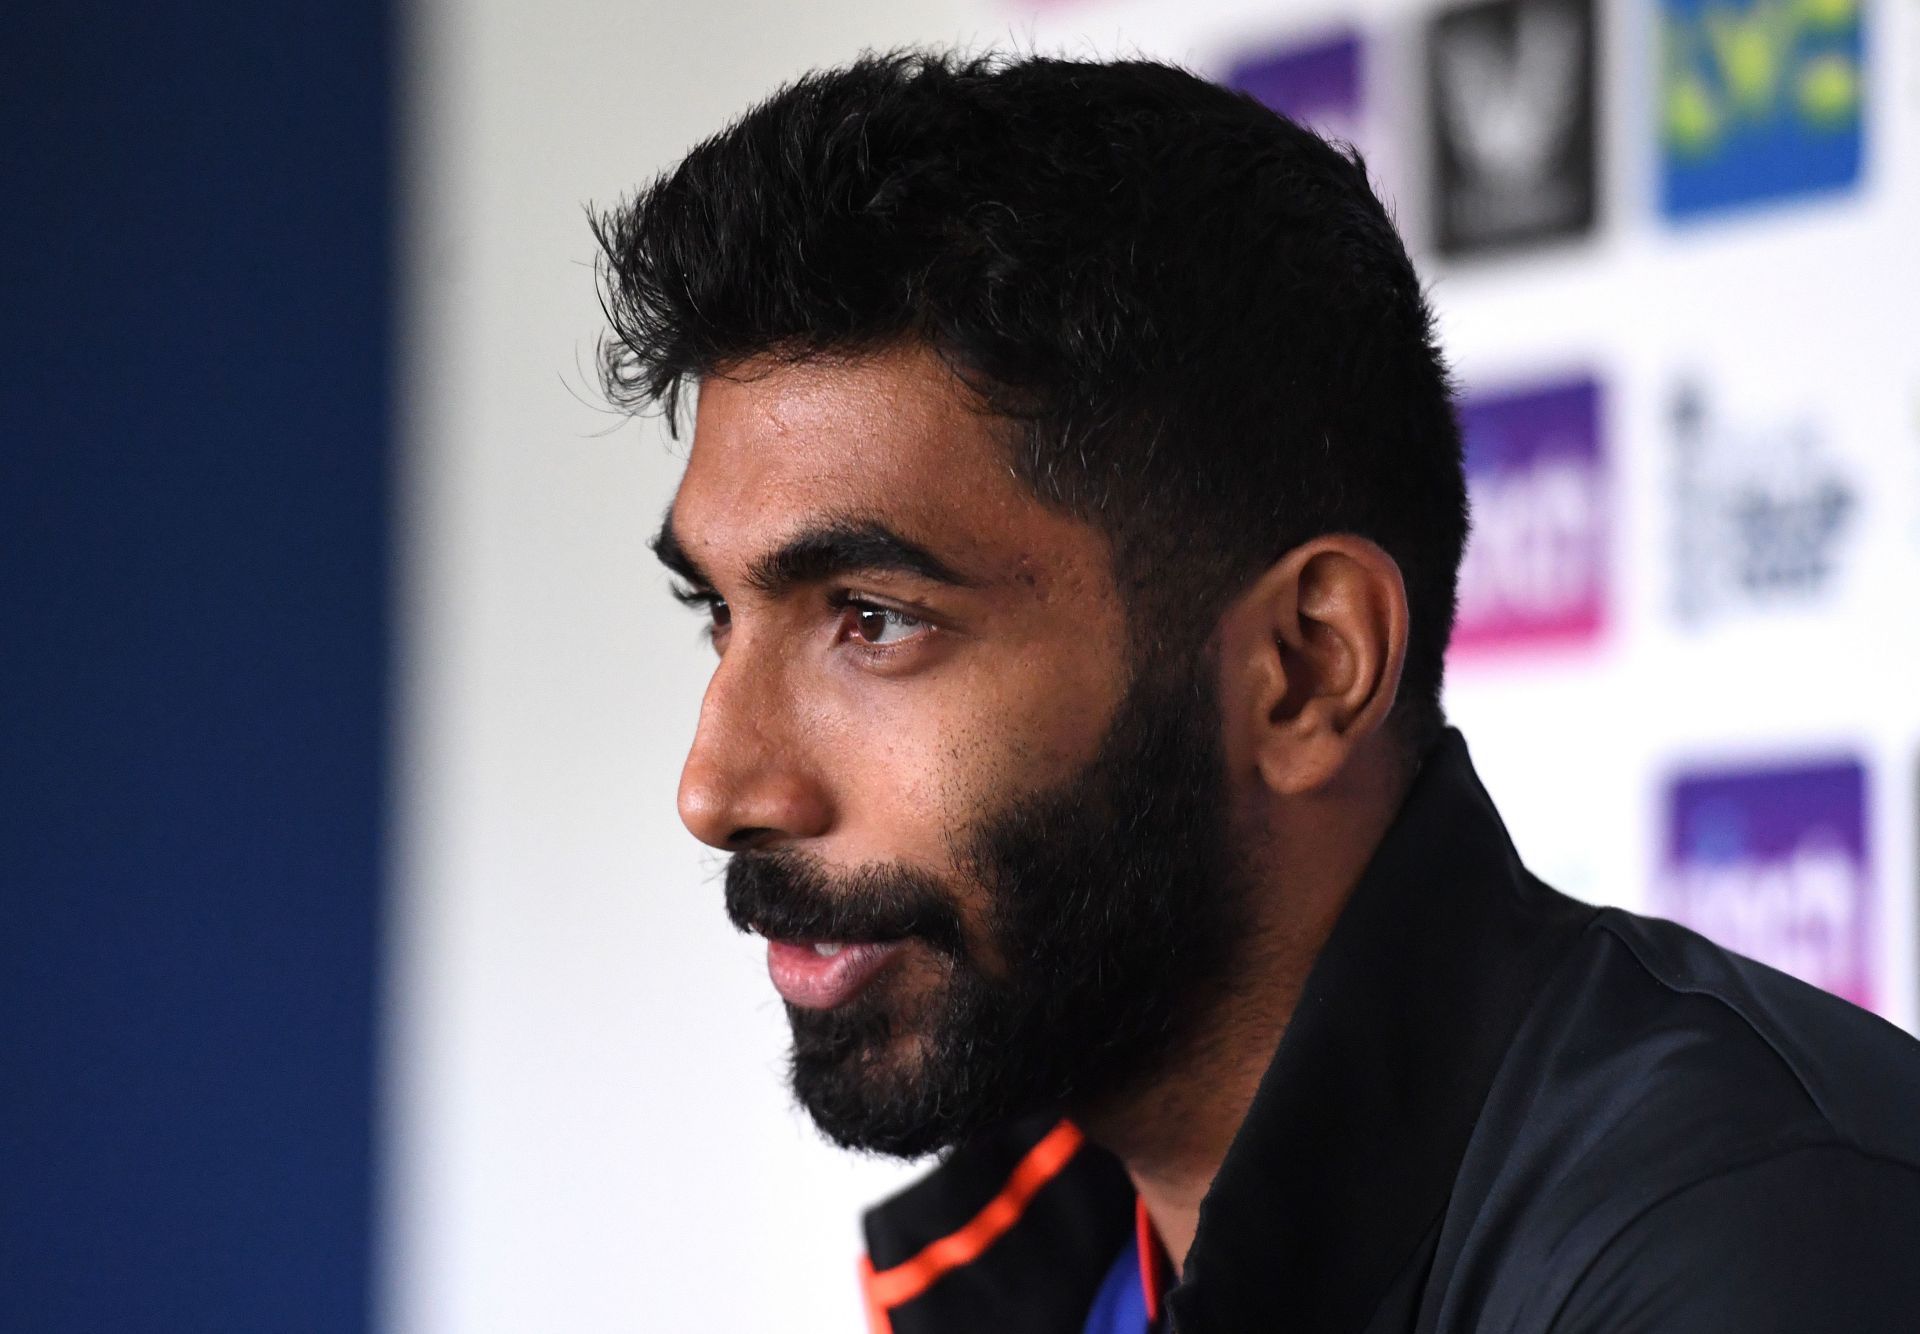 Jasprit Bumrah will lead India in the fifth Test against England at Birmingham.